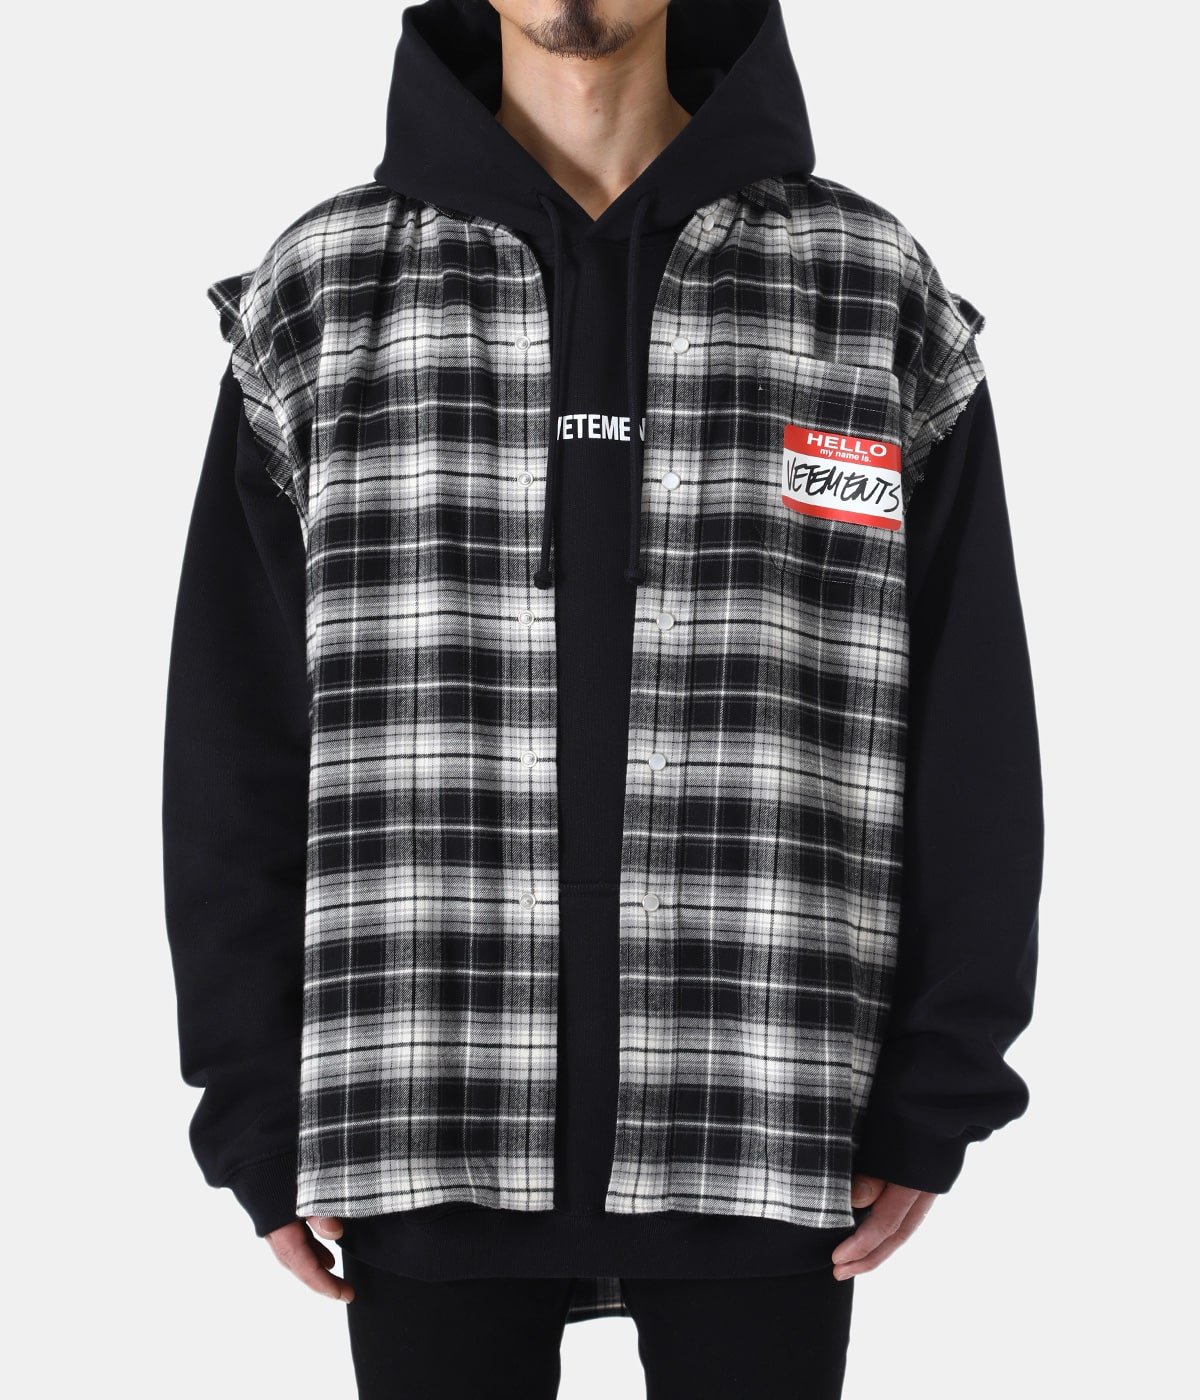 MY NAME IS VETEMENTS SLEEVELESS FLANNEL SHIRT